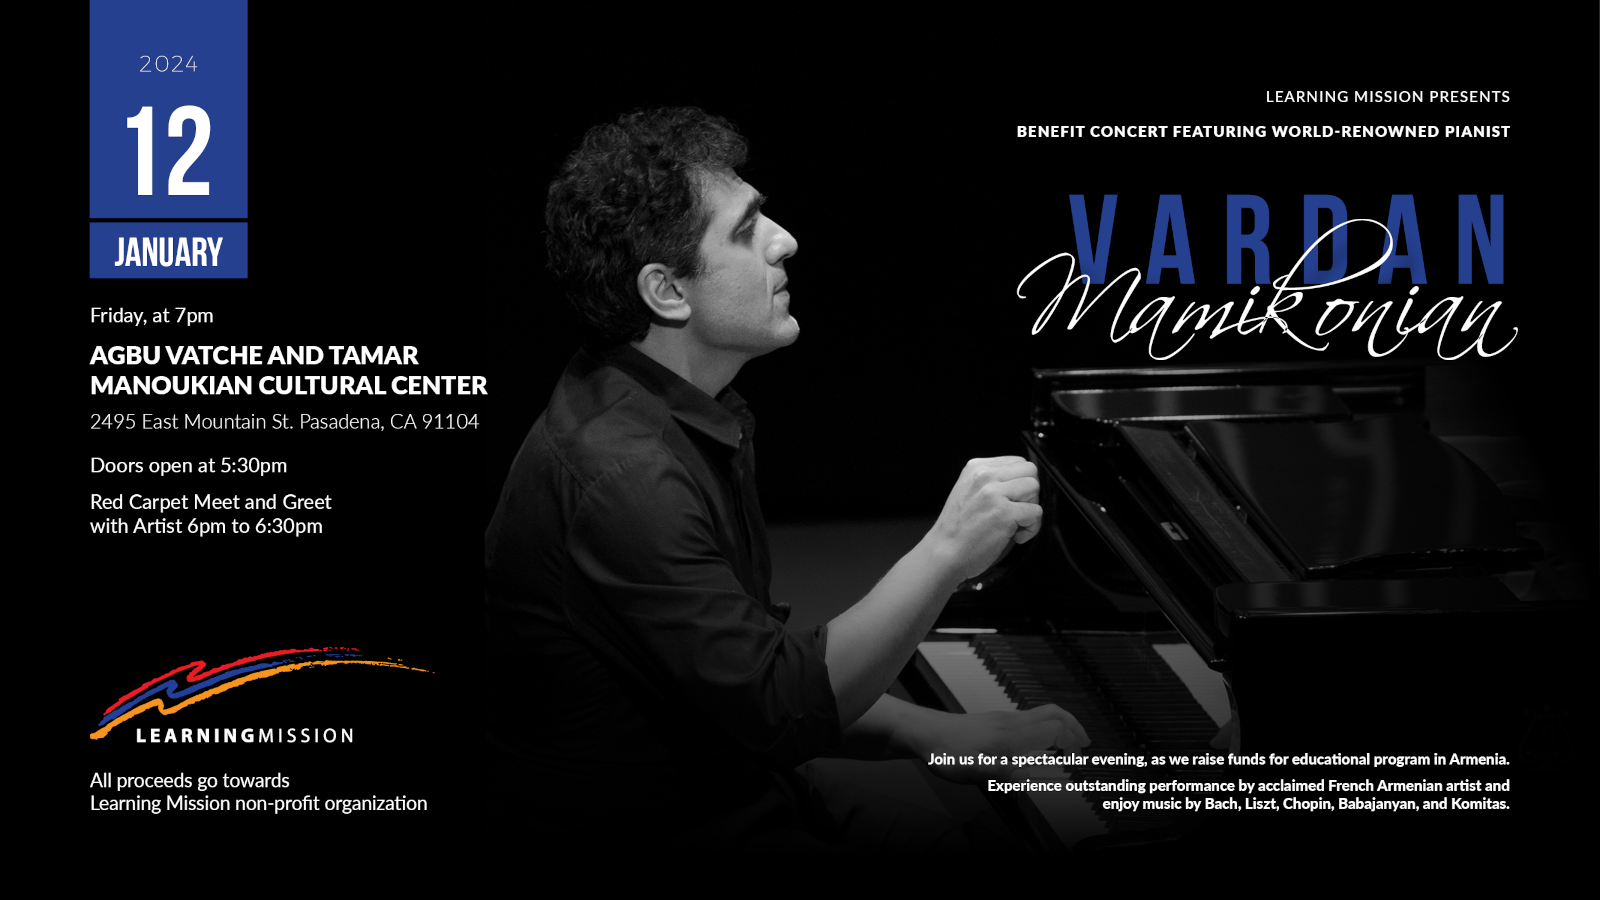 Learning Mission Presents: Benefit Concert Featuring World-Renowned Pianist Vardan Mamikonian